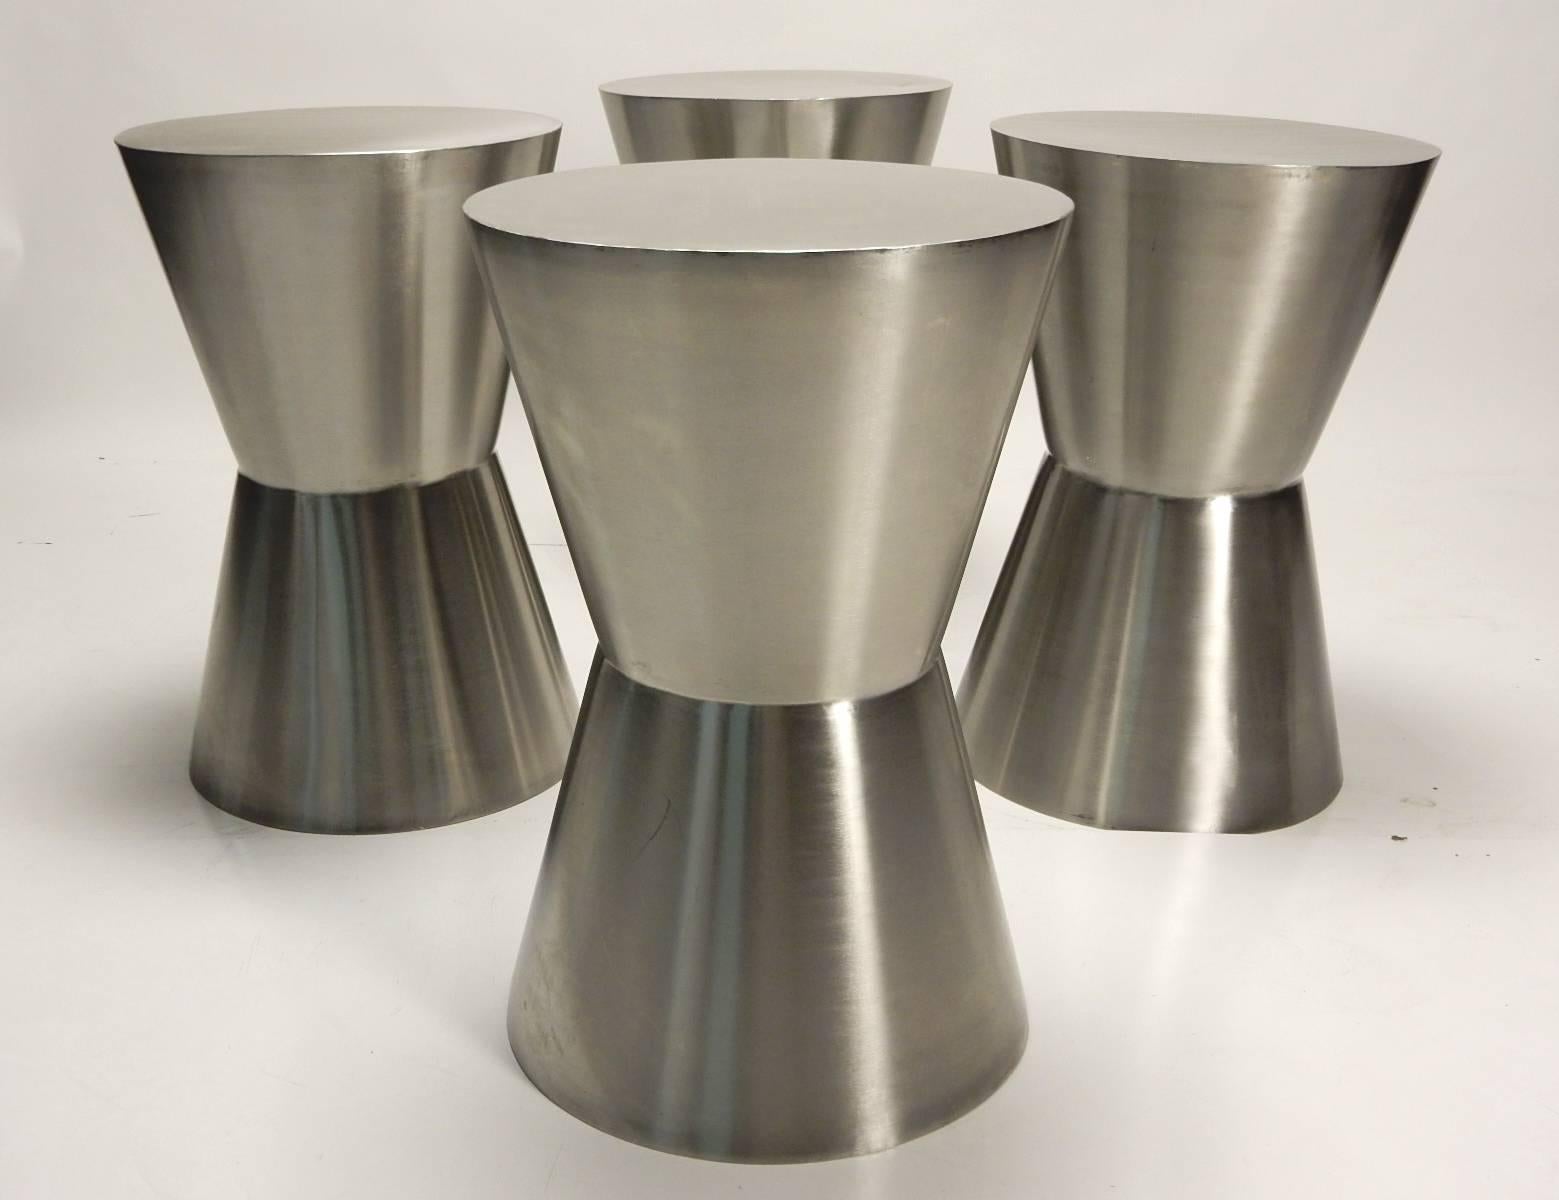 Four Stainless Steel Hourglass Sculptural Stools or Tables 1